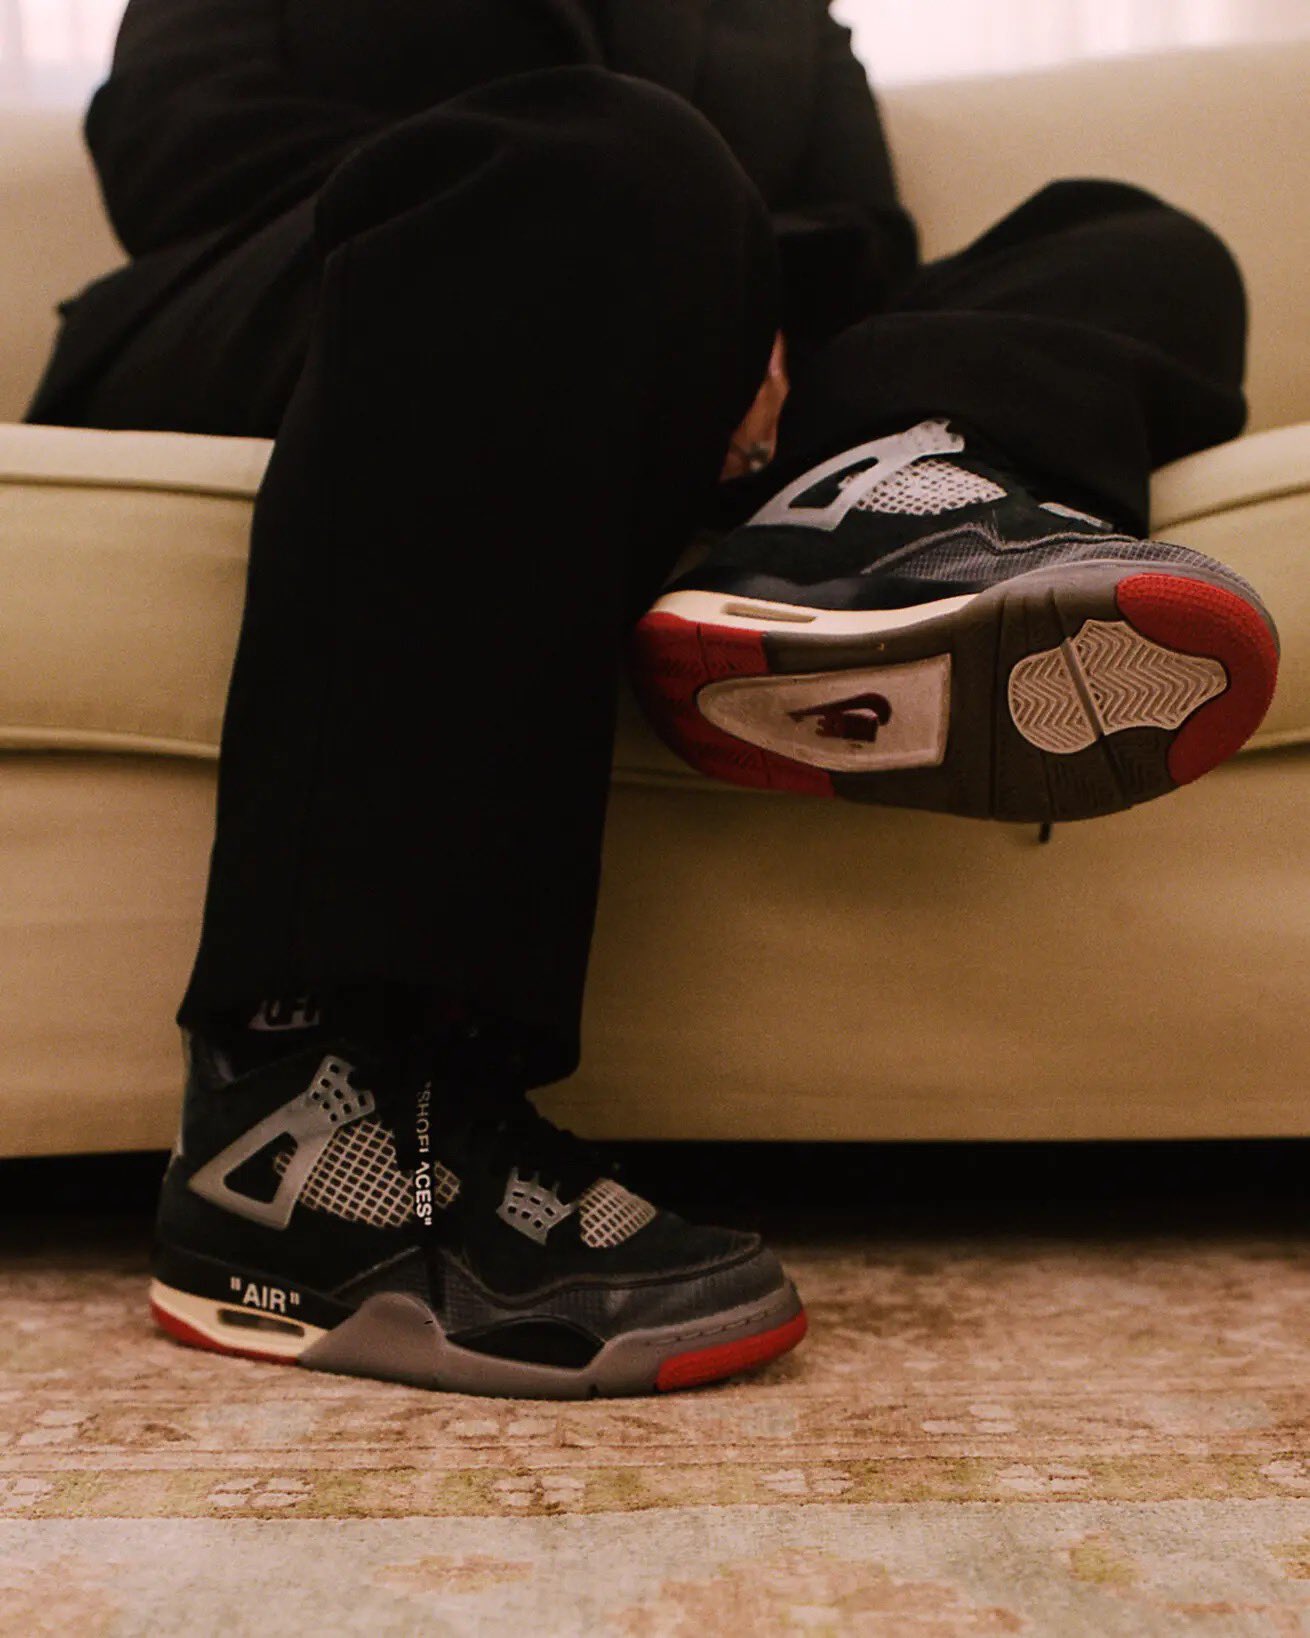 Shannon Abloh Shows Off Unreleased Off-White™ x Air Jordan IV Prototype